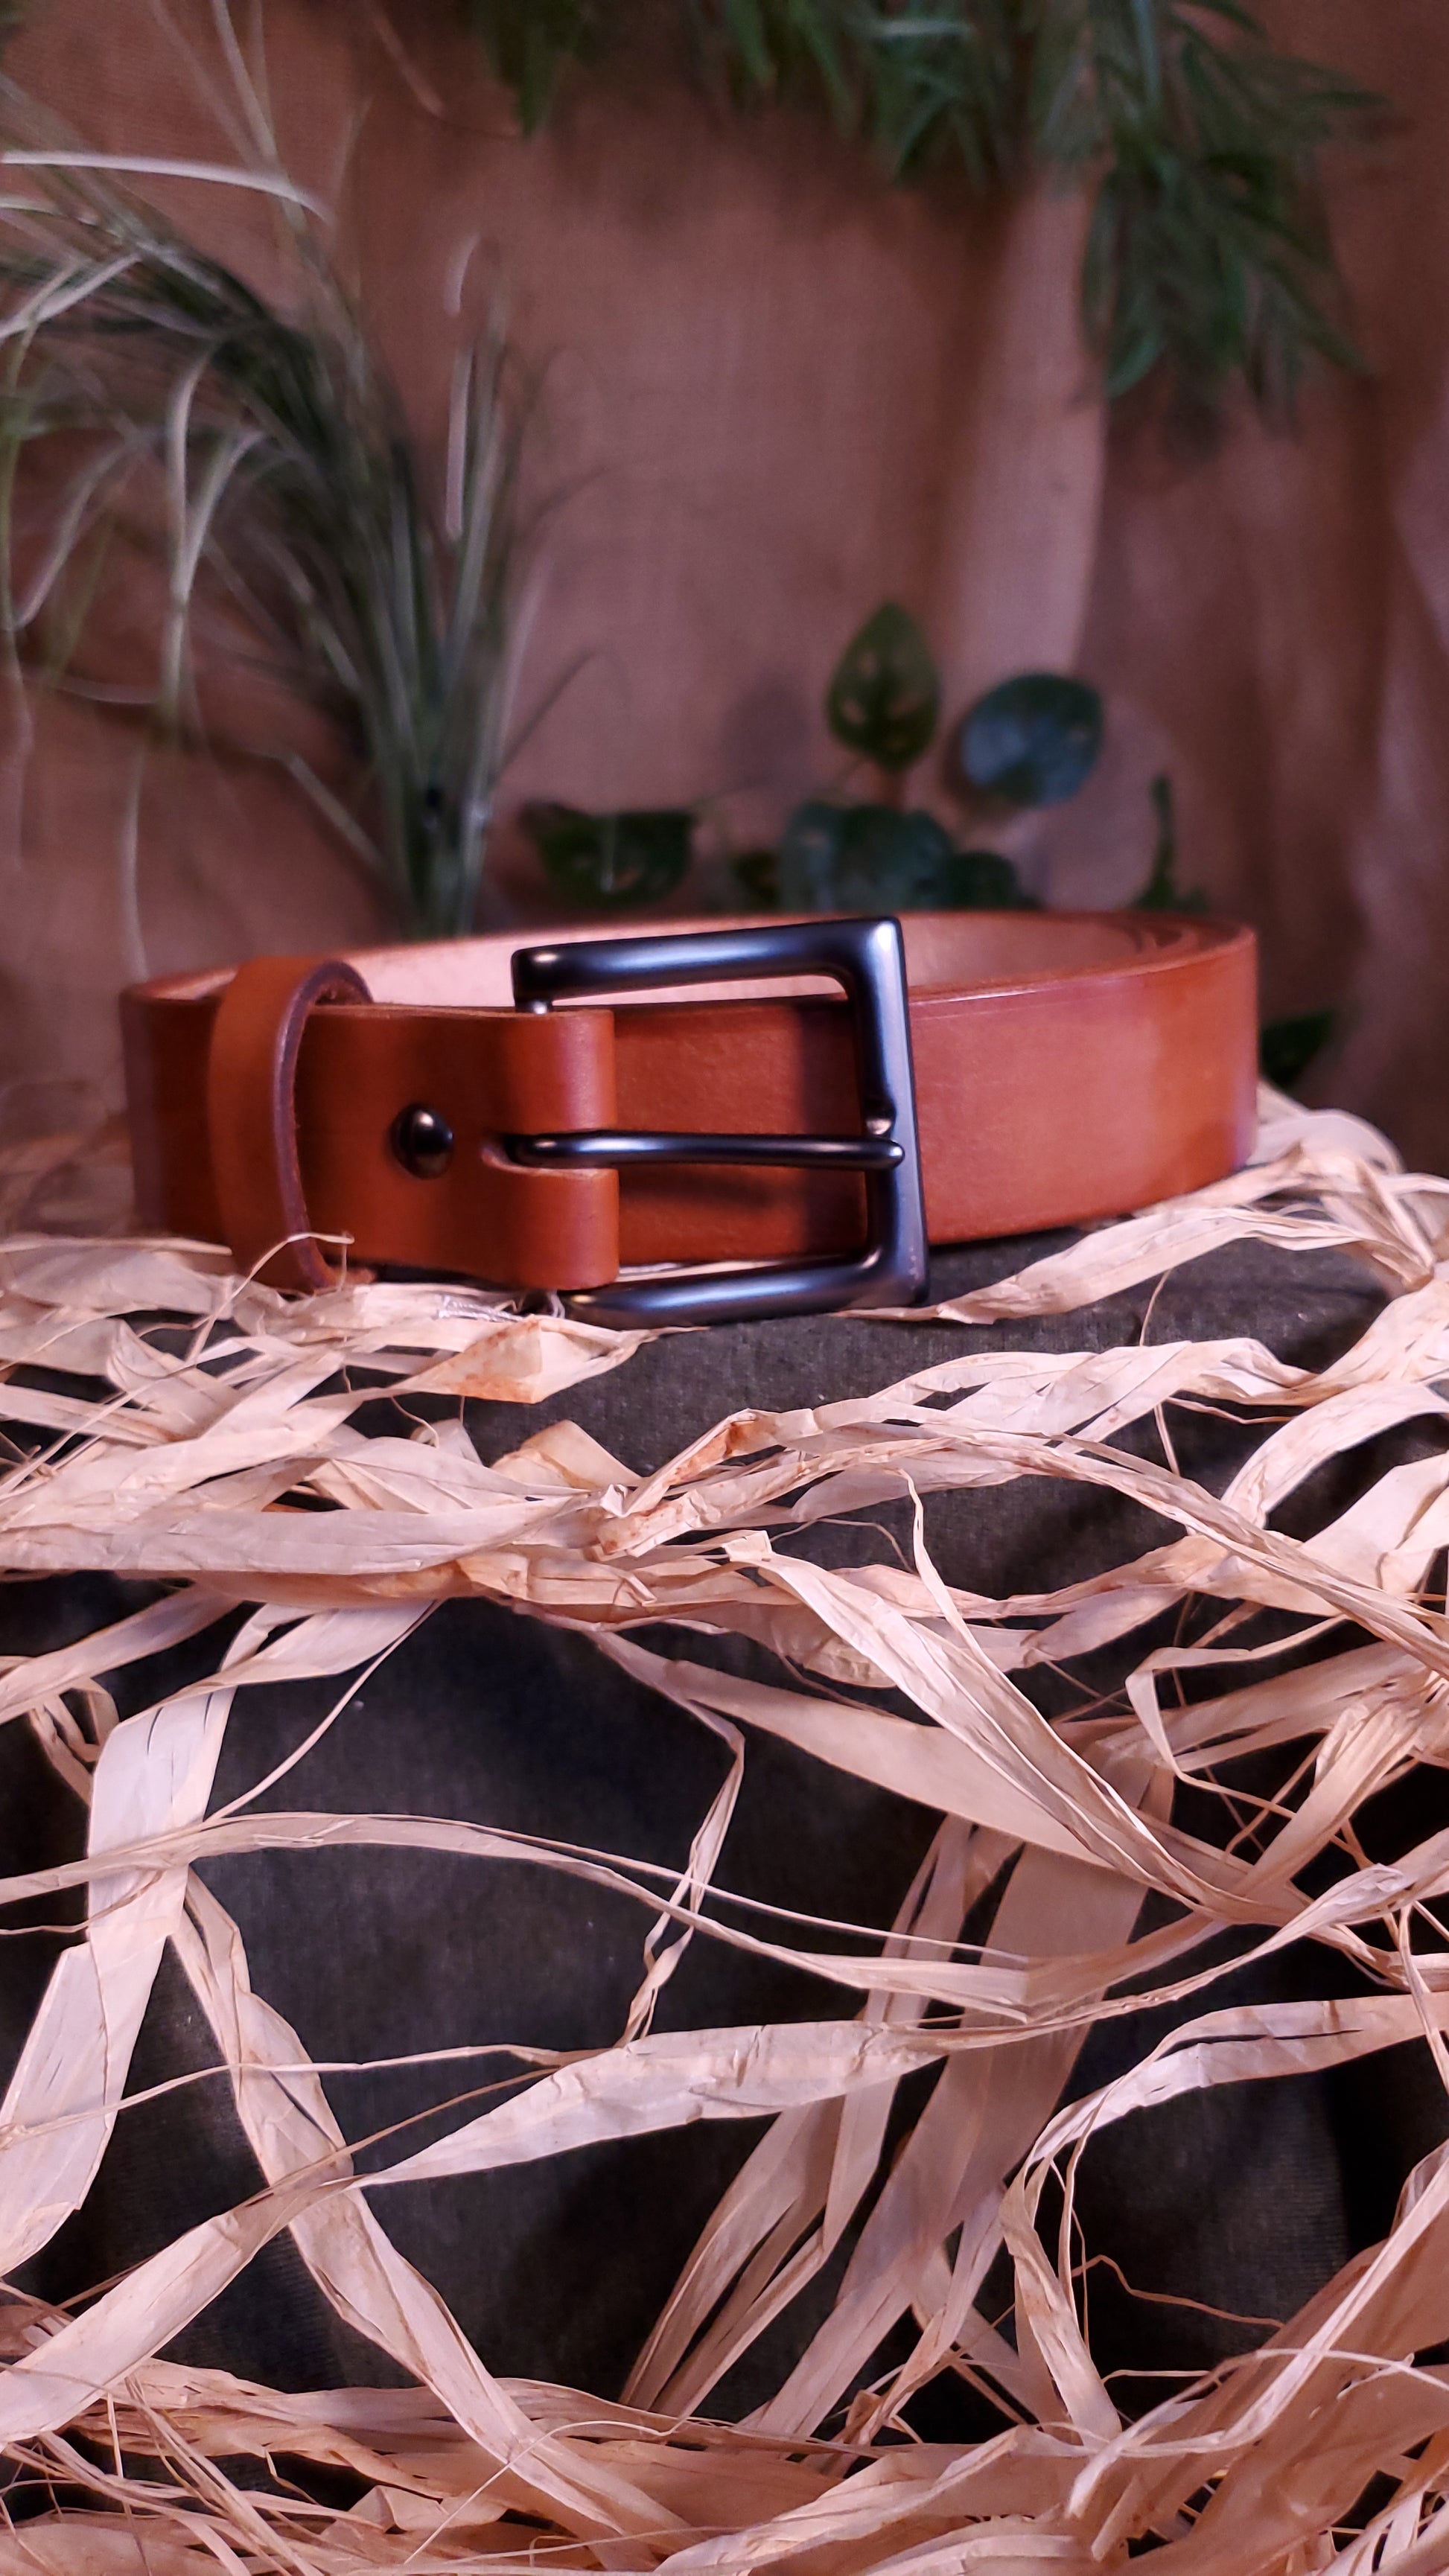 Brown colored belt with a gun metal buckle and matching hardware.